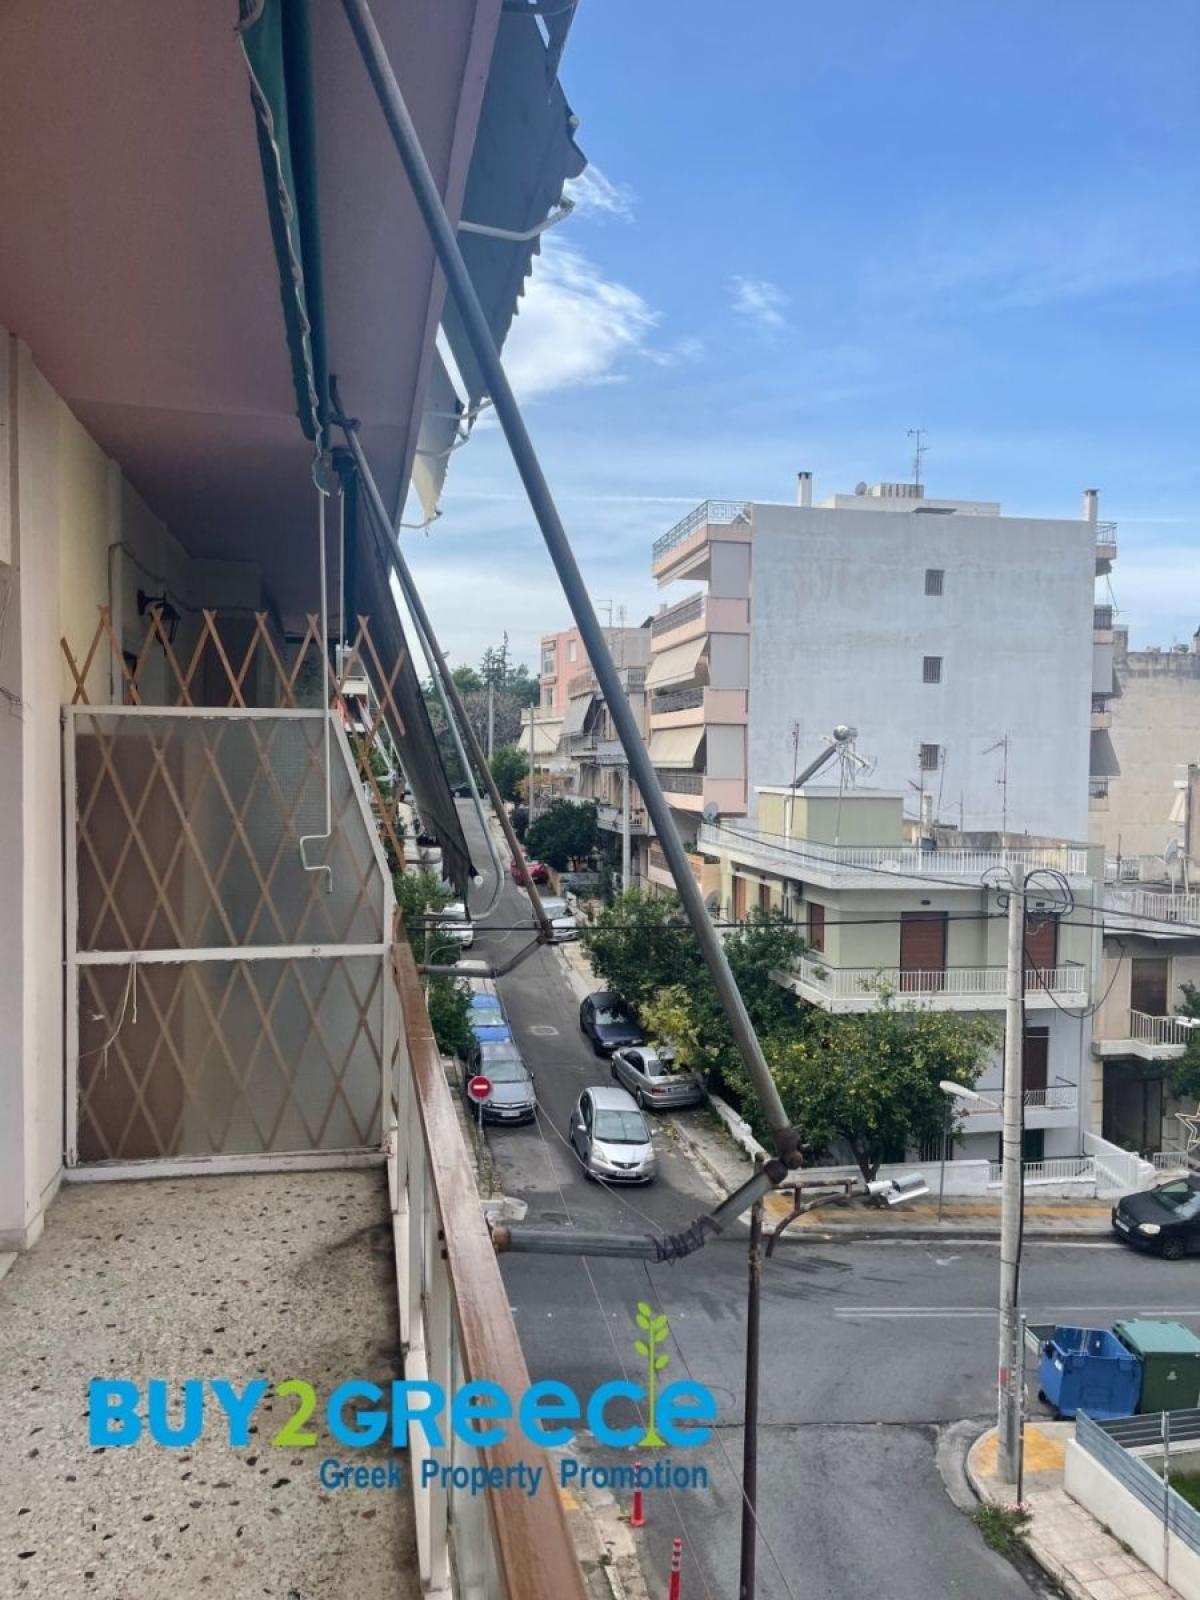 Picture of Apartment For Sale in Zografou, Other, Greece